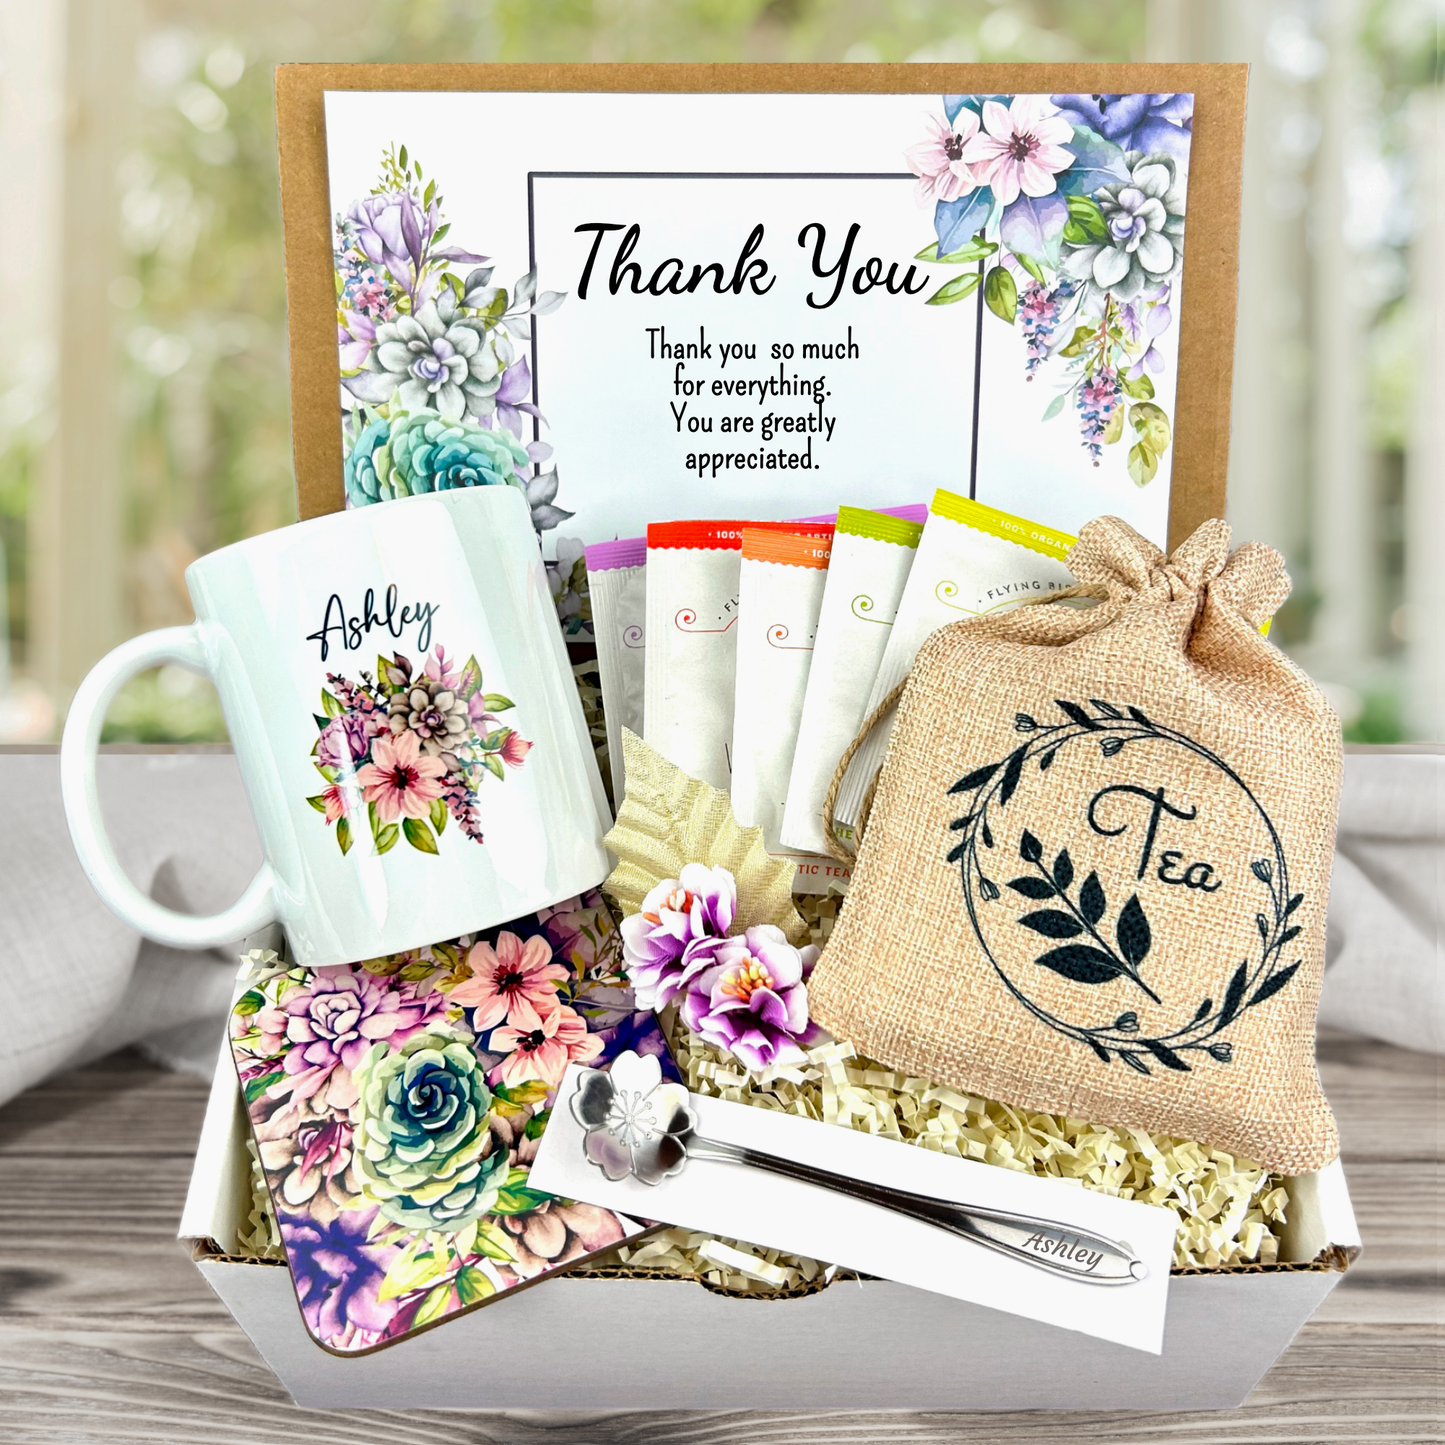 Thank You Gift for Tea Lover - Appreciation Gift with Assorted Tea